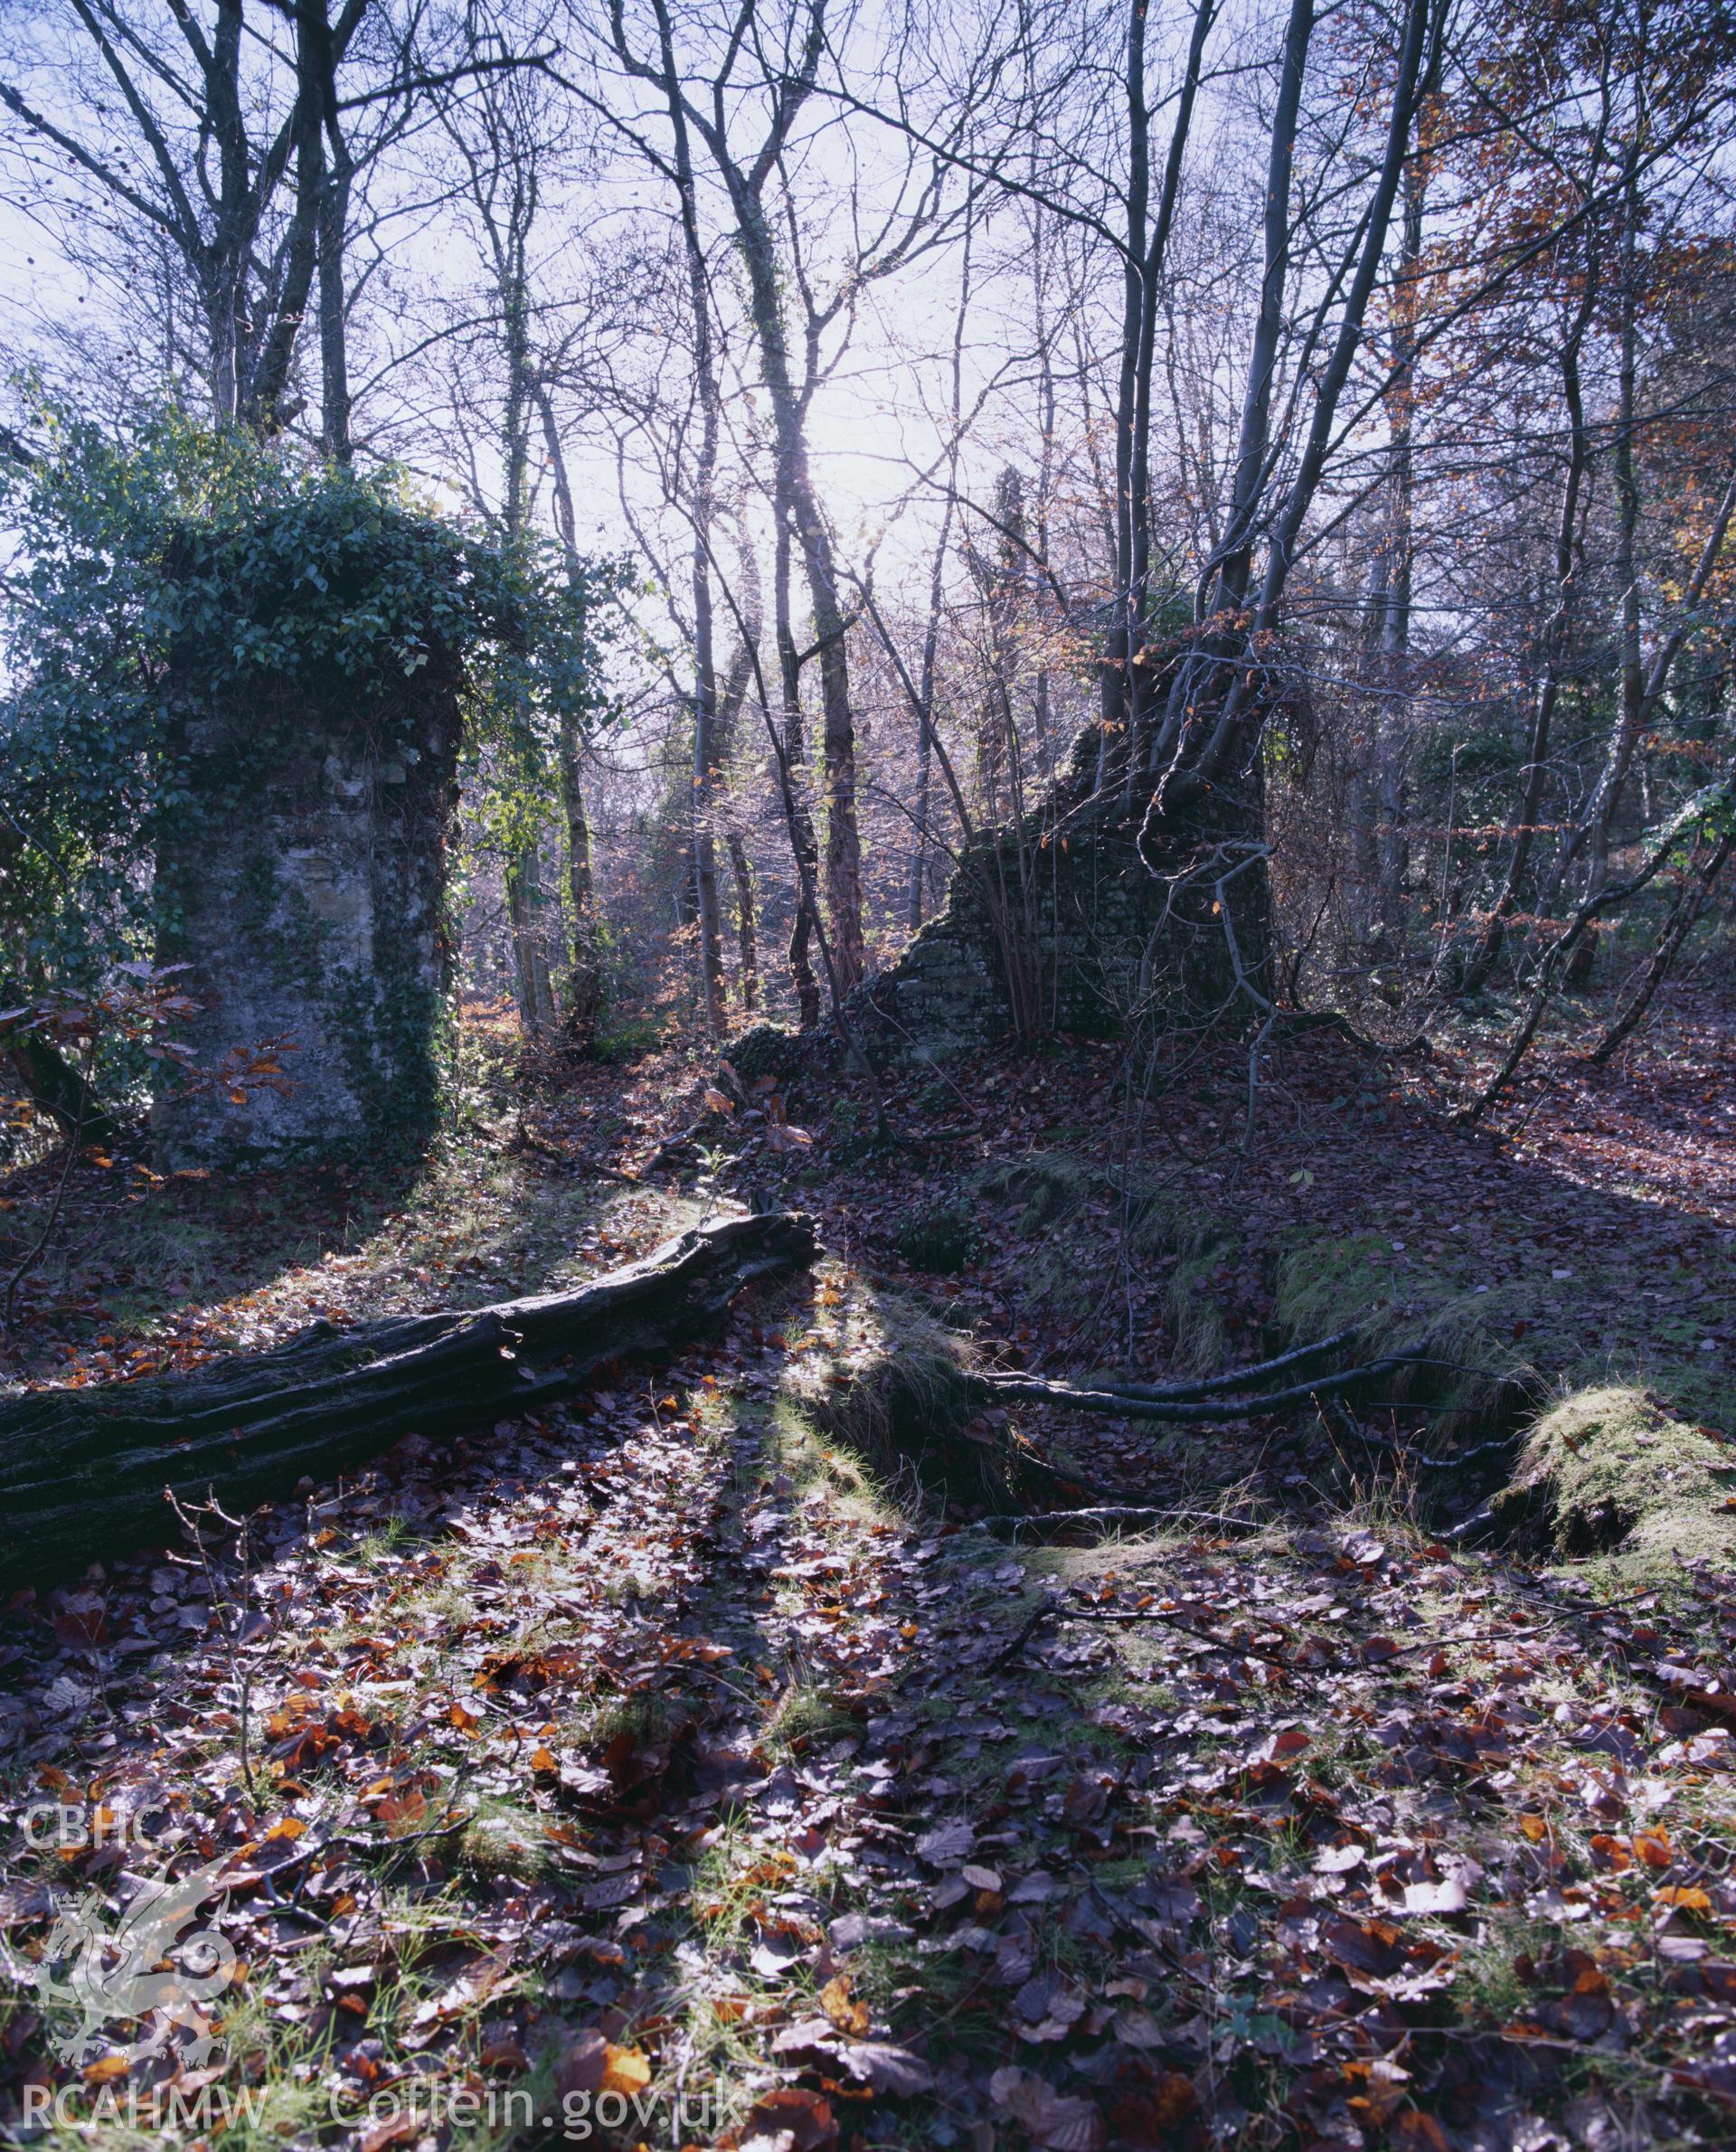 RCAHMW colour transparency showing the remains of Clyne Valley Arsenic Works, taken by Iain Wright, c.1981